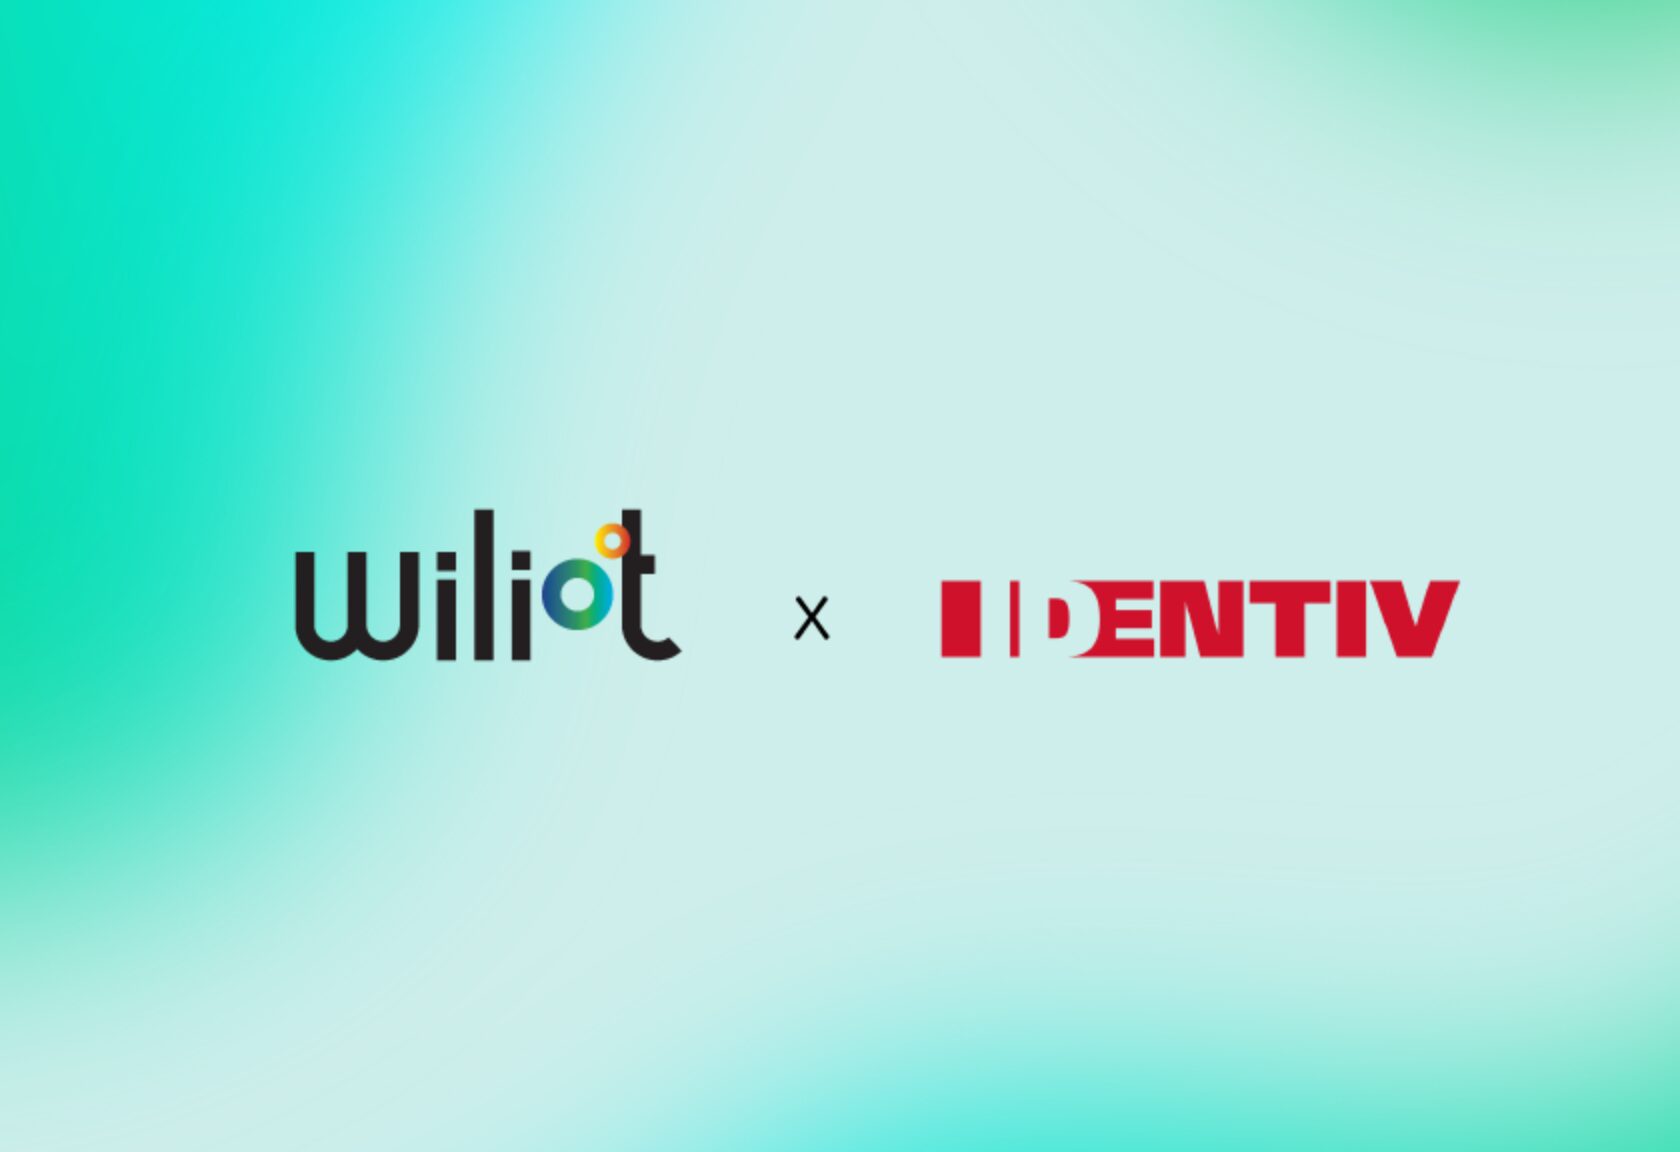 Wiliot Partners with Identiv to Manufacture Initial Order of 25 Million Units of its IoT Pixel Tags